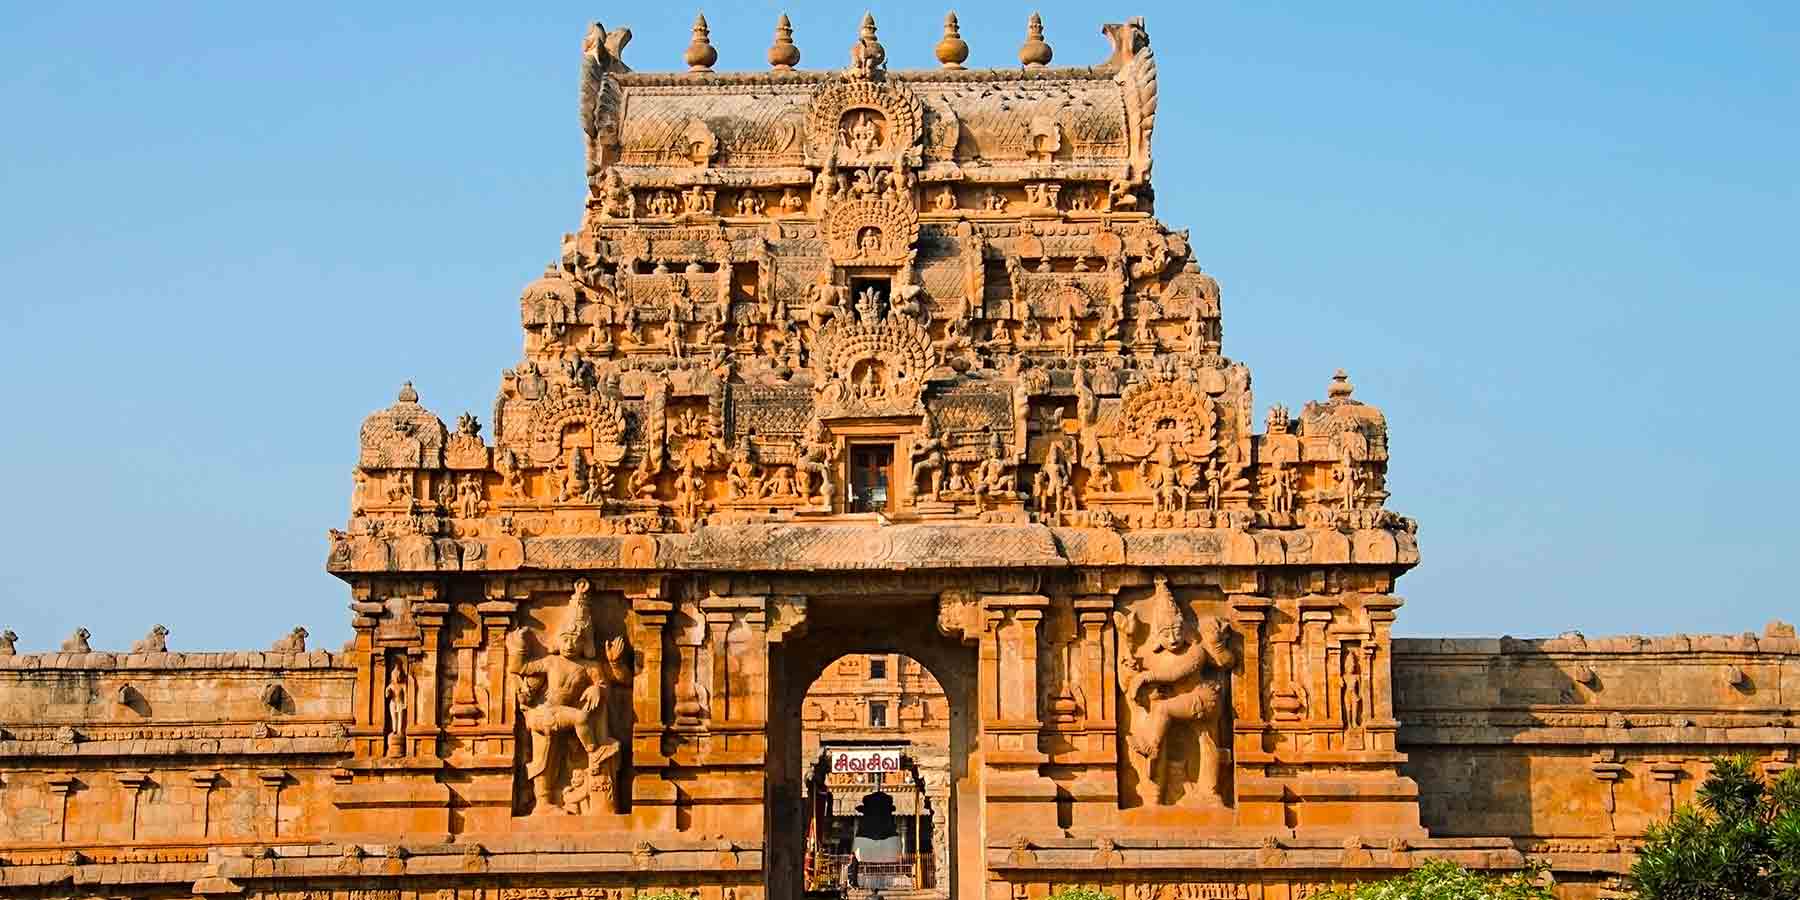 the architectural marvel of the brihadeeswara temple